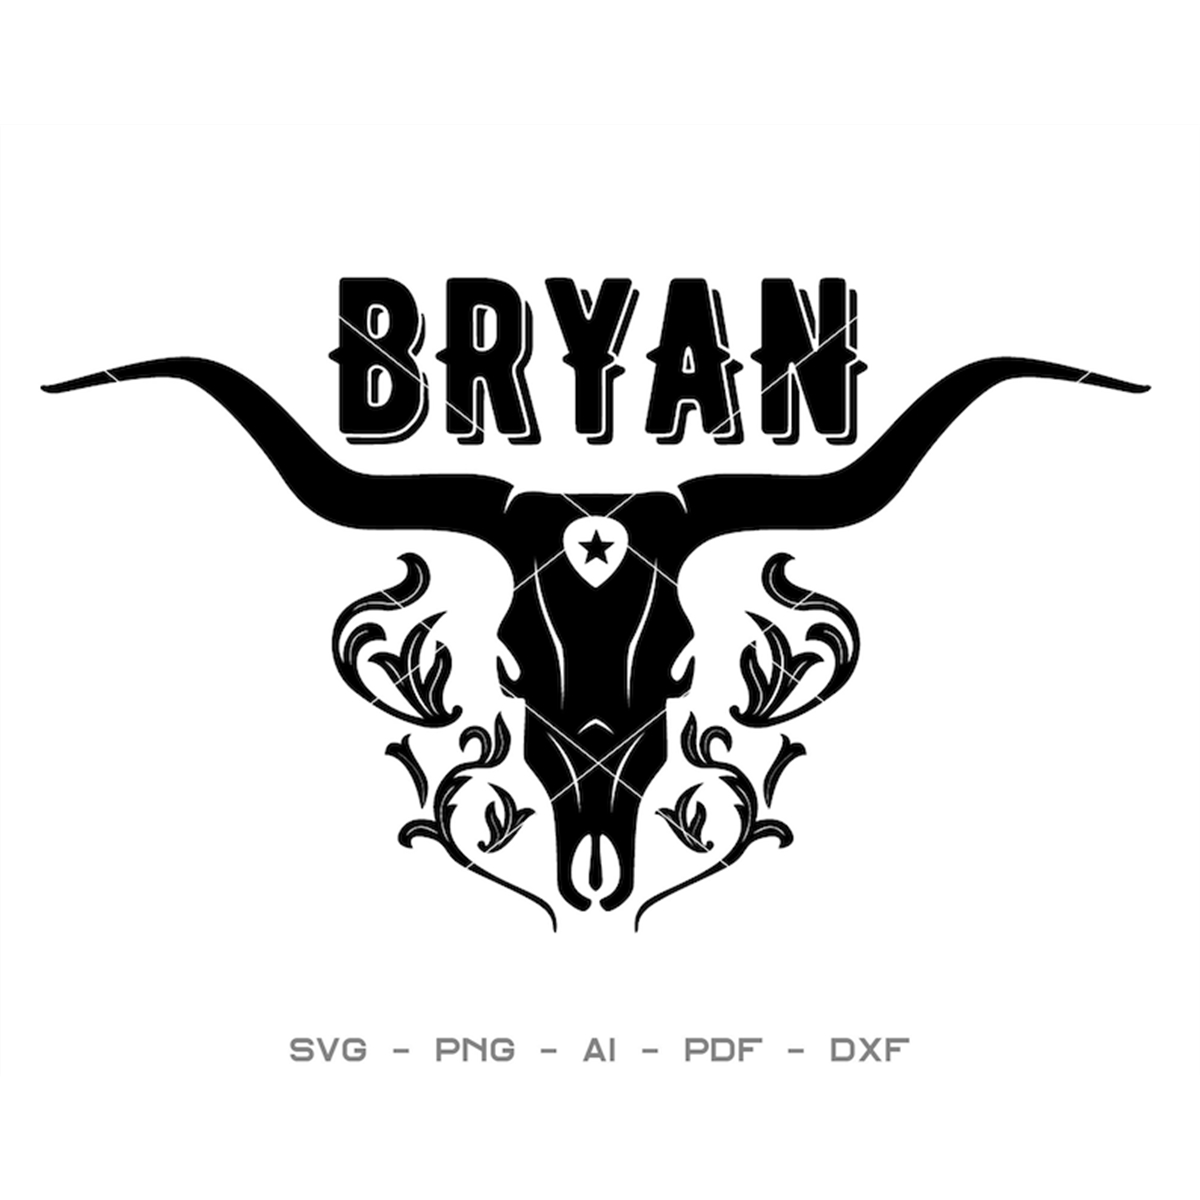 bryan-svg-download-file-for-cricut-laser-cut-and-print-image-1